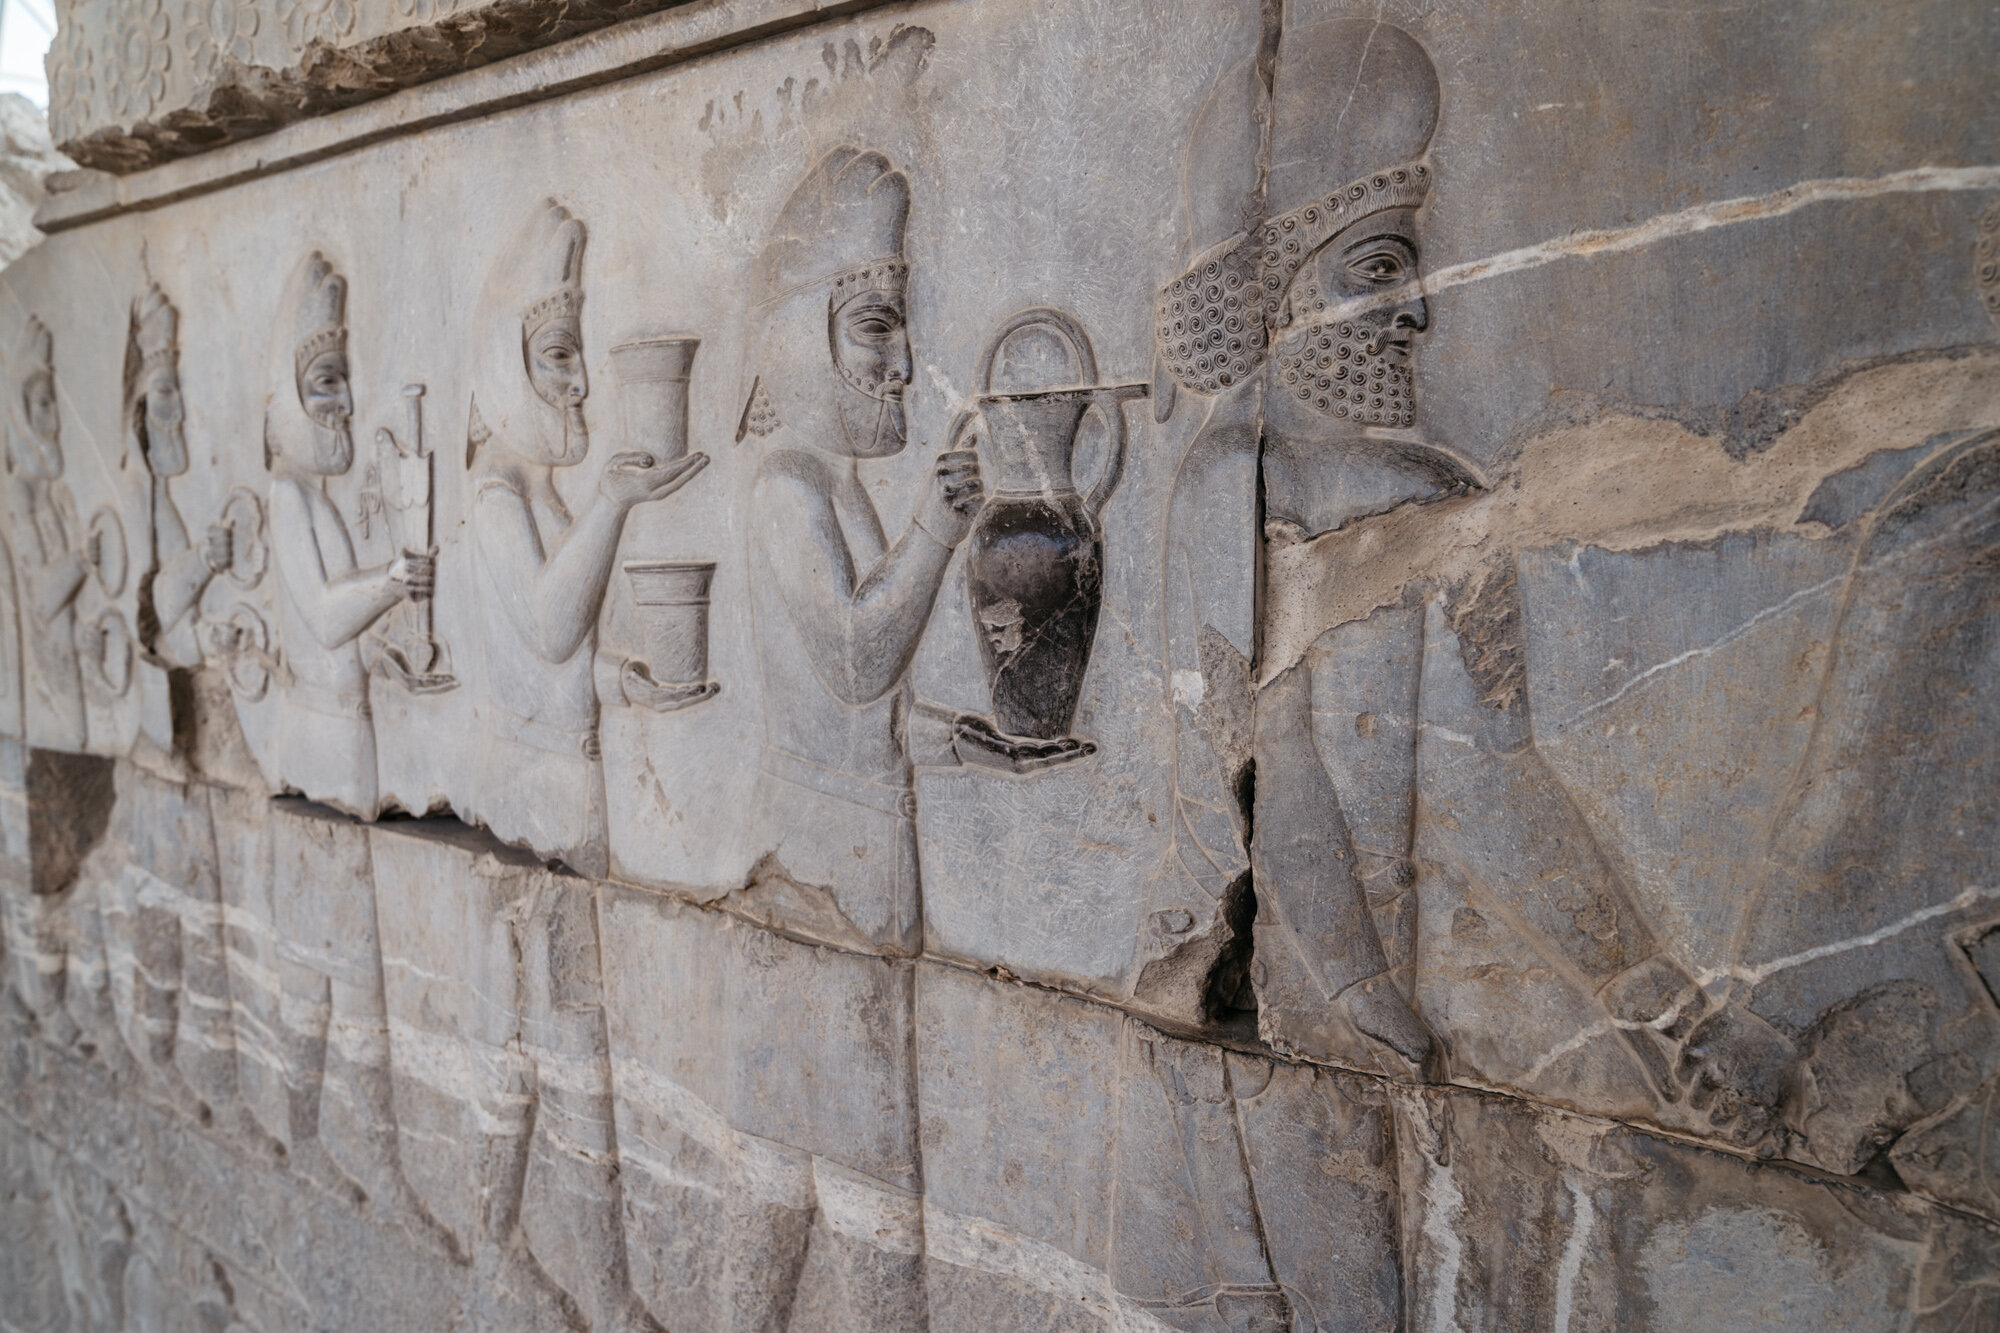  Bas reliefs that depict delegations from across the Persian empire bringing tribute to the Achaemenid kings 